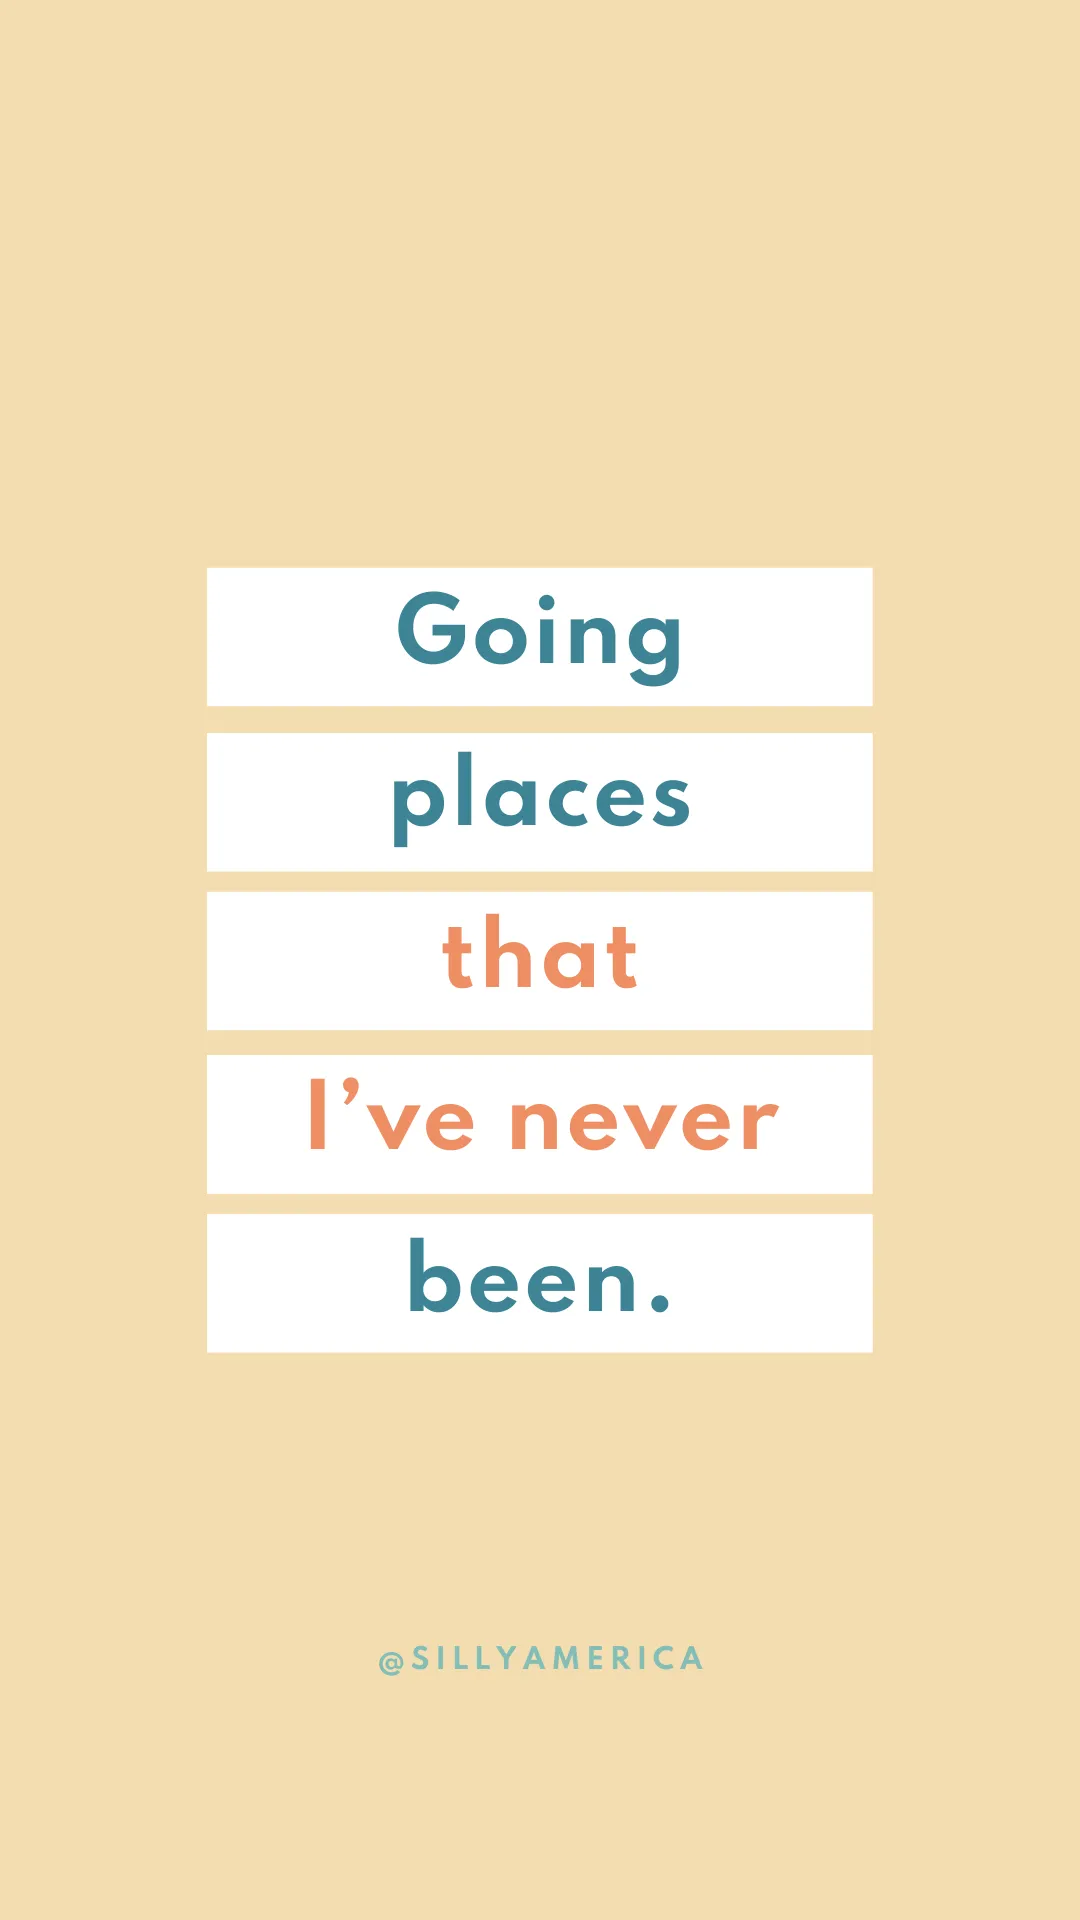 Going places that I’ve never been. - Road Trip Captions for Instagram